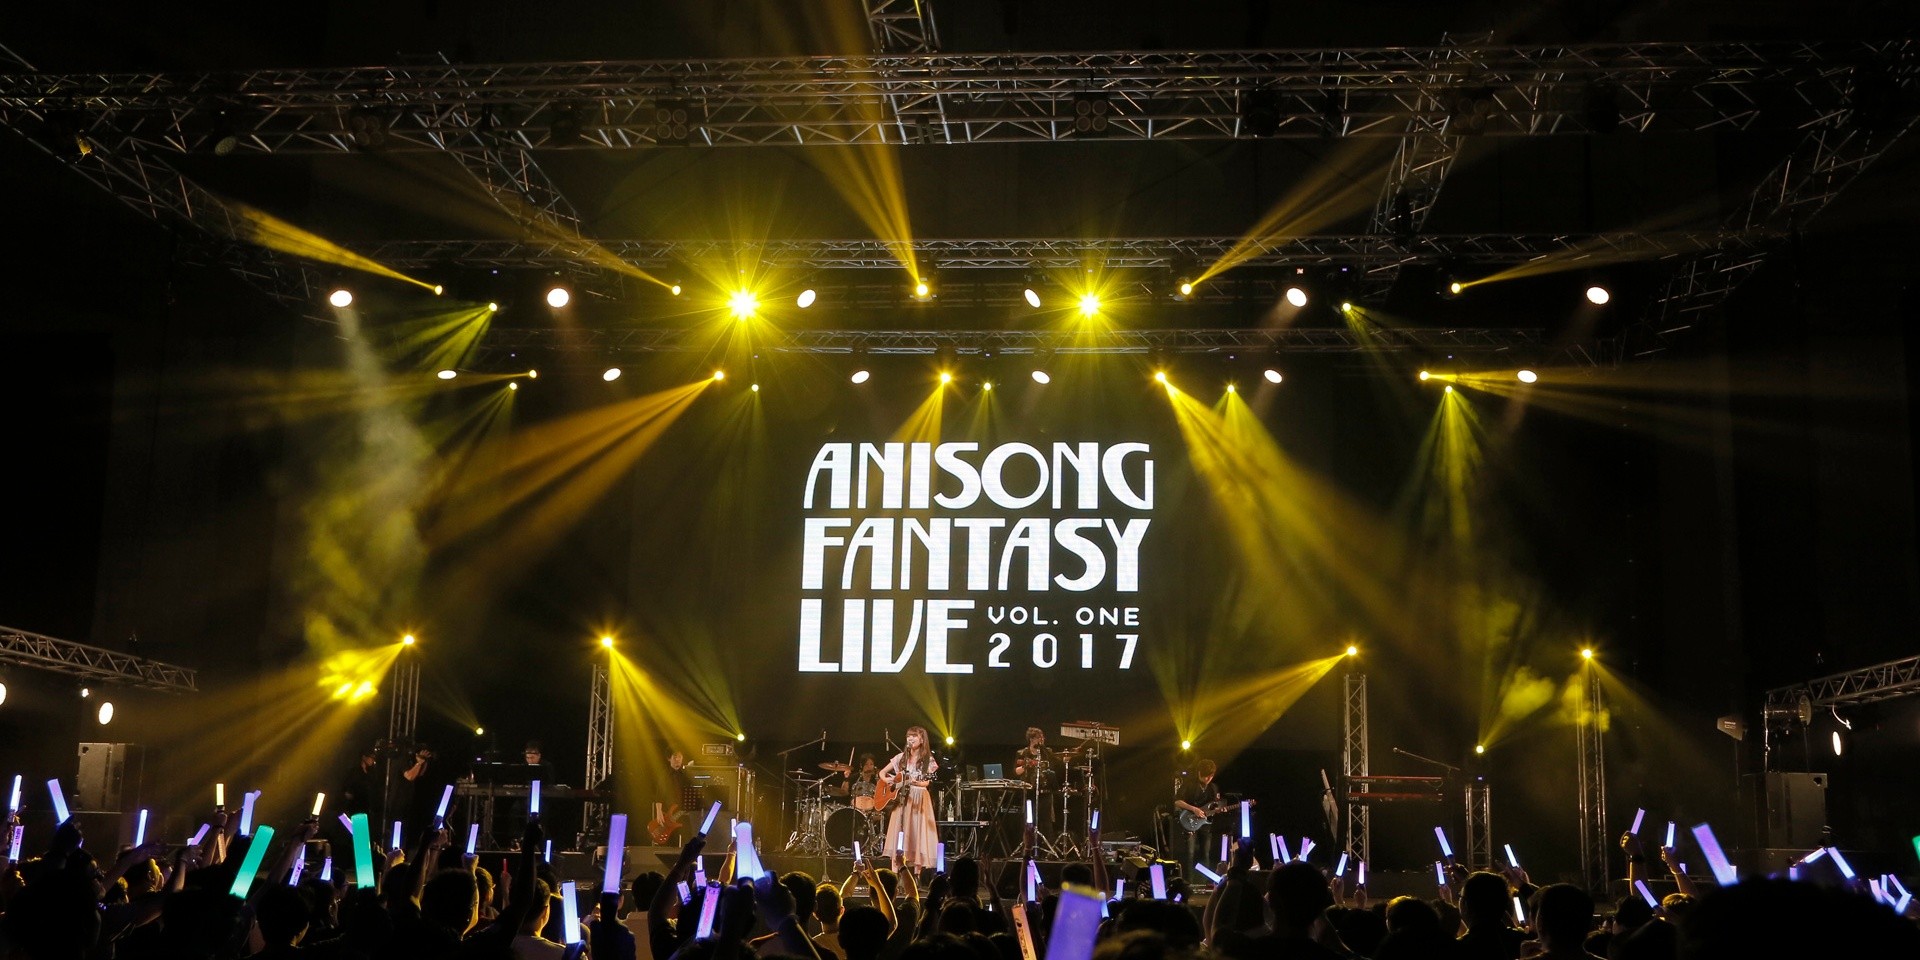 Anime theme songs came alive at Anisong Fantasy Live in Singapore